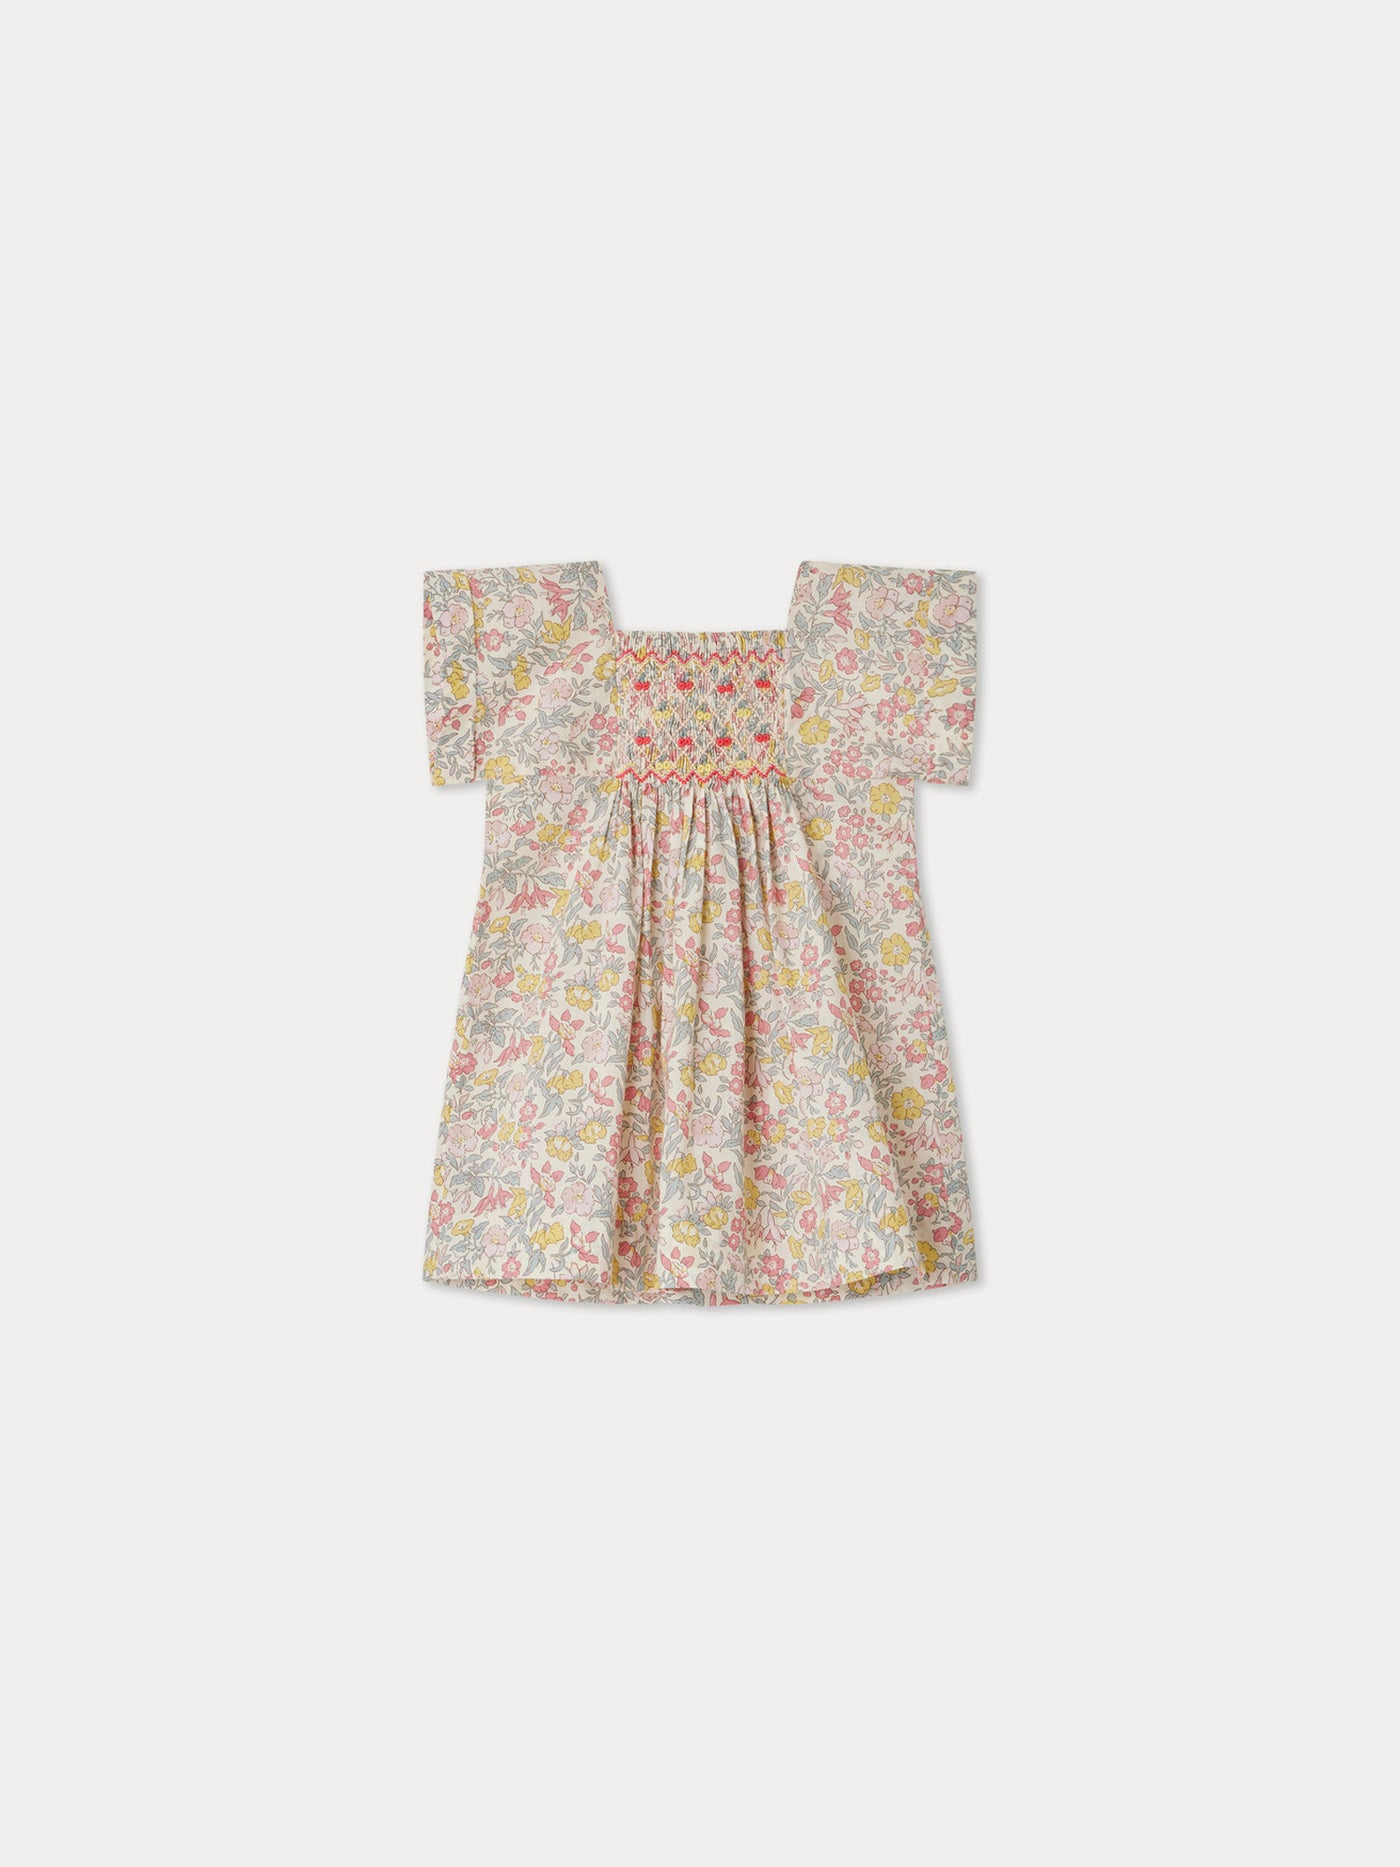 Pais smocked dress in Liberty fabric